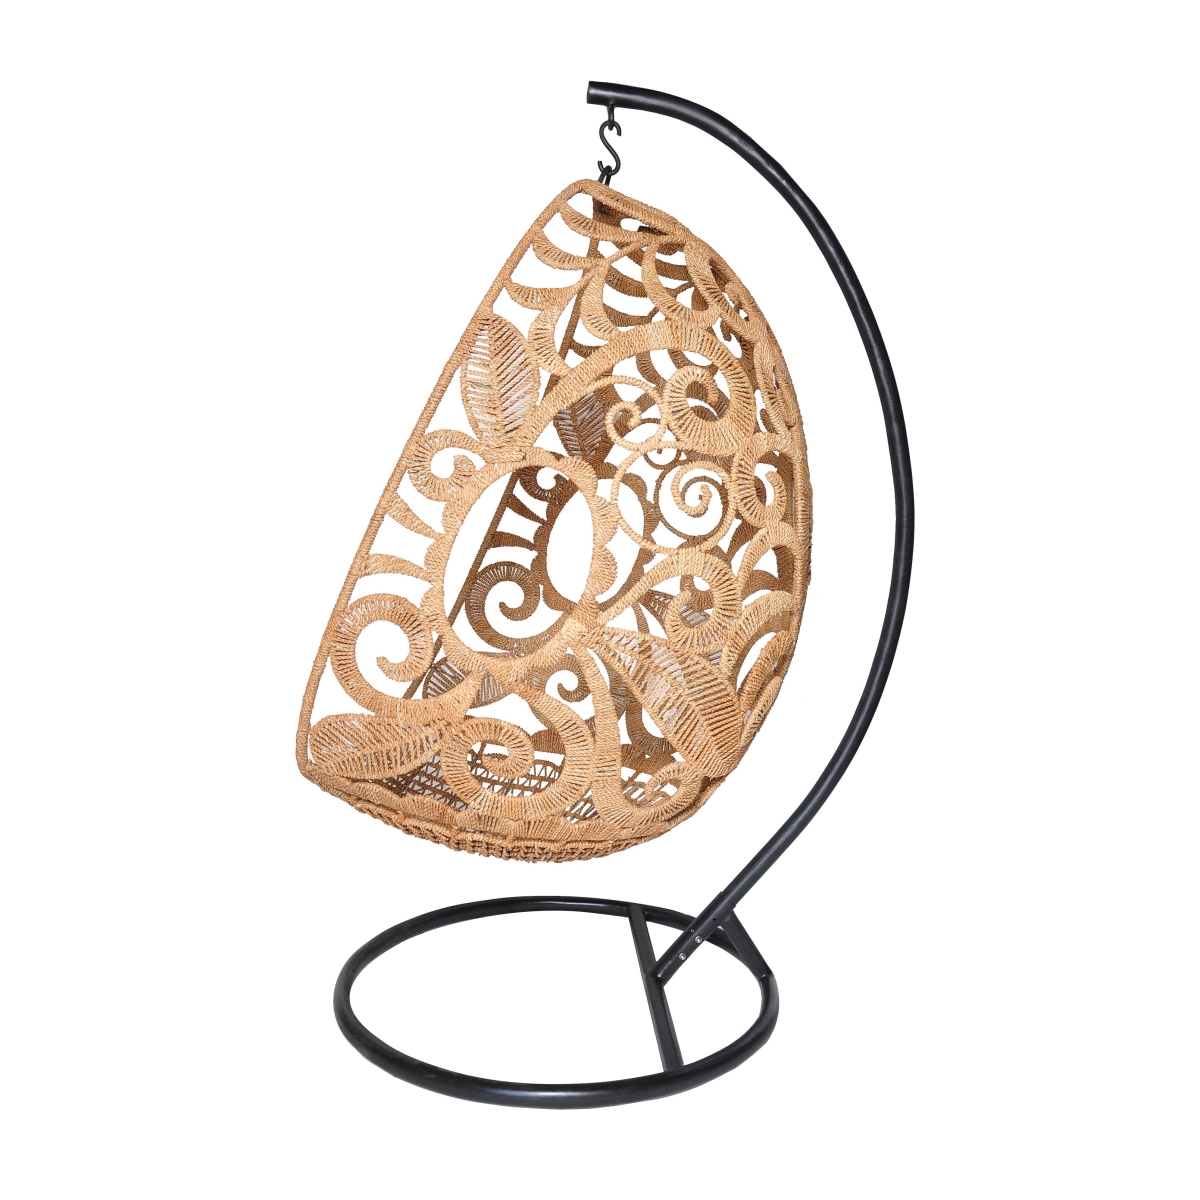 Npk-149 Oval Swing Chair With Stand